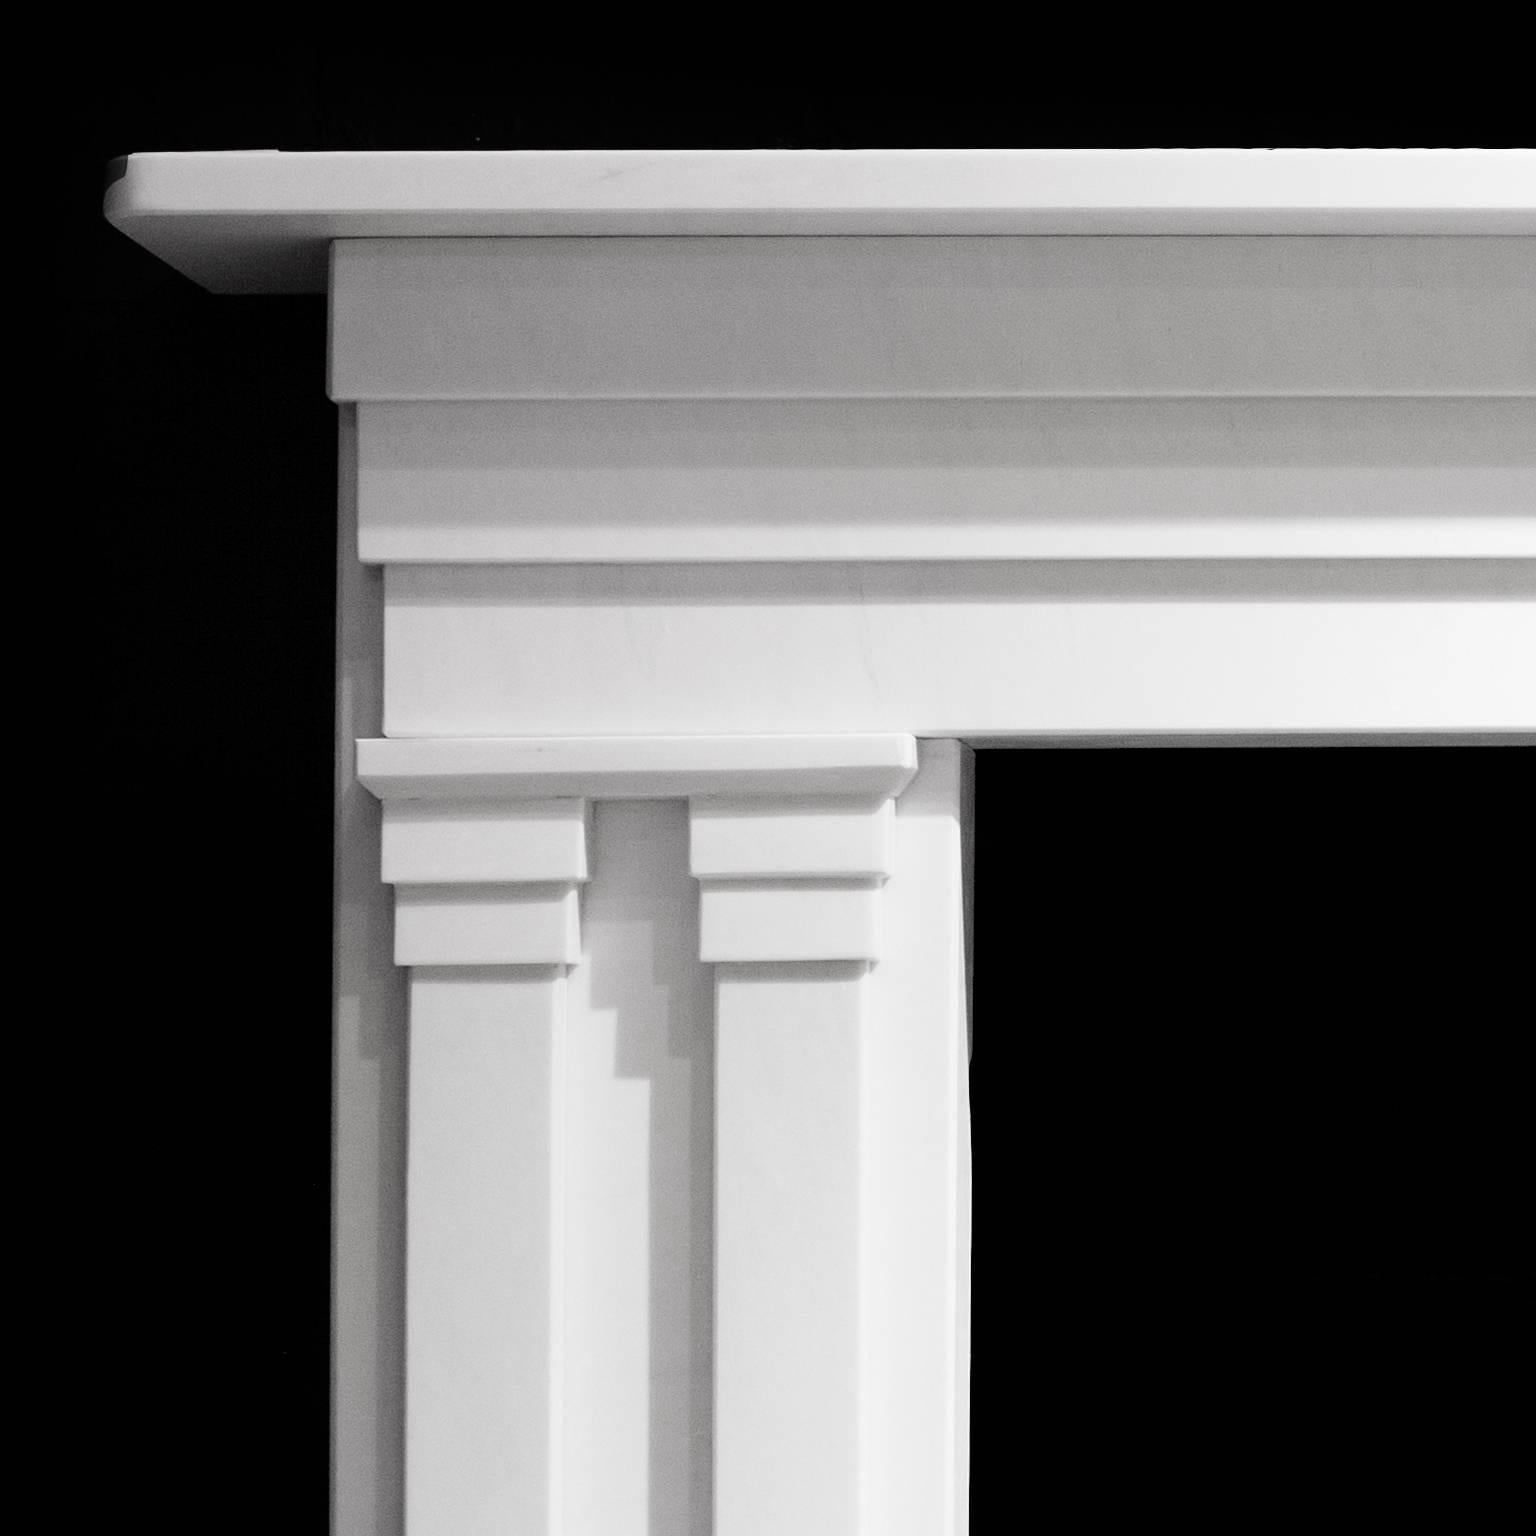 A very nice white honed marble fireplace. English made.
Late Georgian / Early Victorian design. Caved in Italian statuary marble. With double columns and Paneled Frieze. Measures: 63 inch wide x 45.5 inch high x 8.25 inch deep.